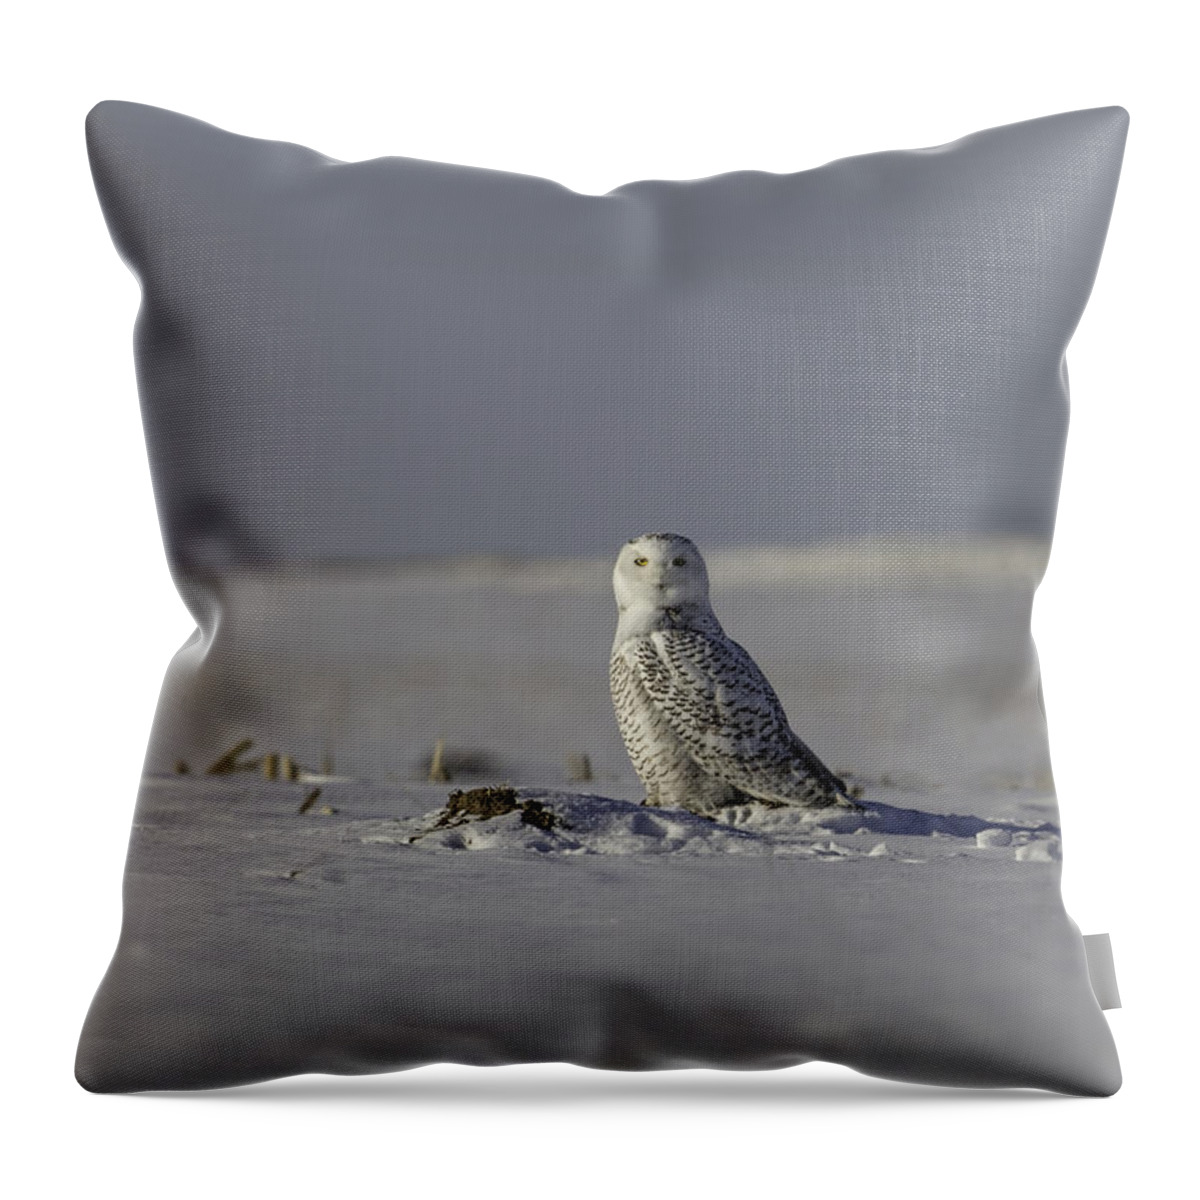 Snowy Owl (bubo Scandiacus) Throw Pillow featuring the photograph Snowy Owl In A Snow Covered Field by Thomas Young